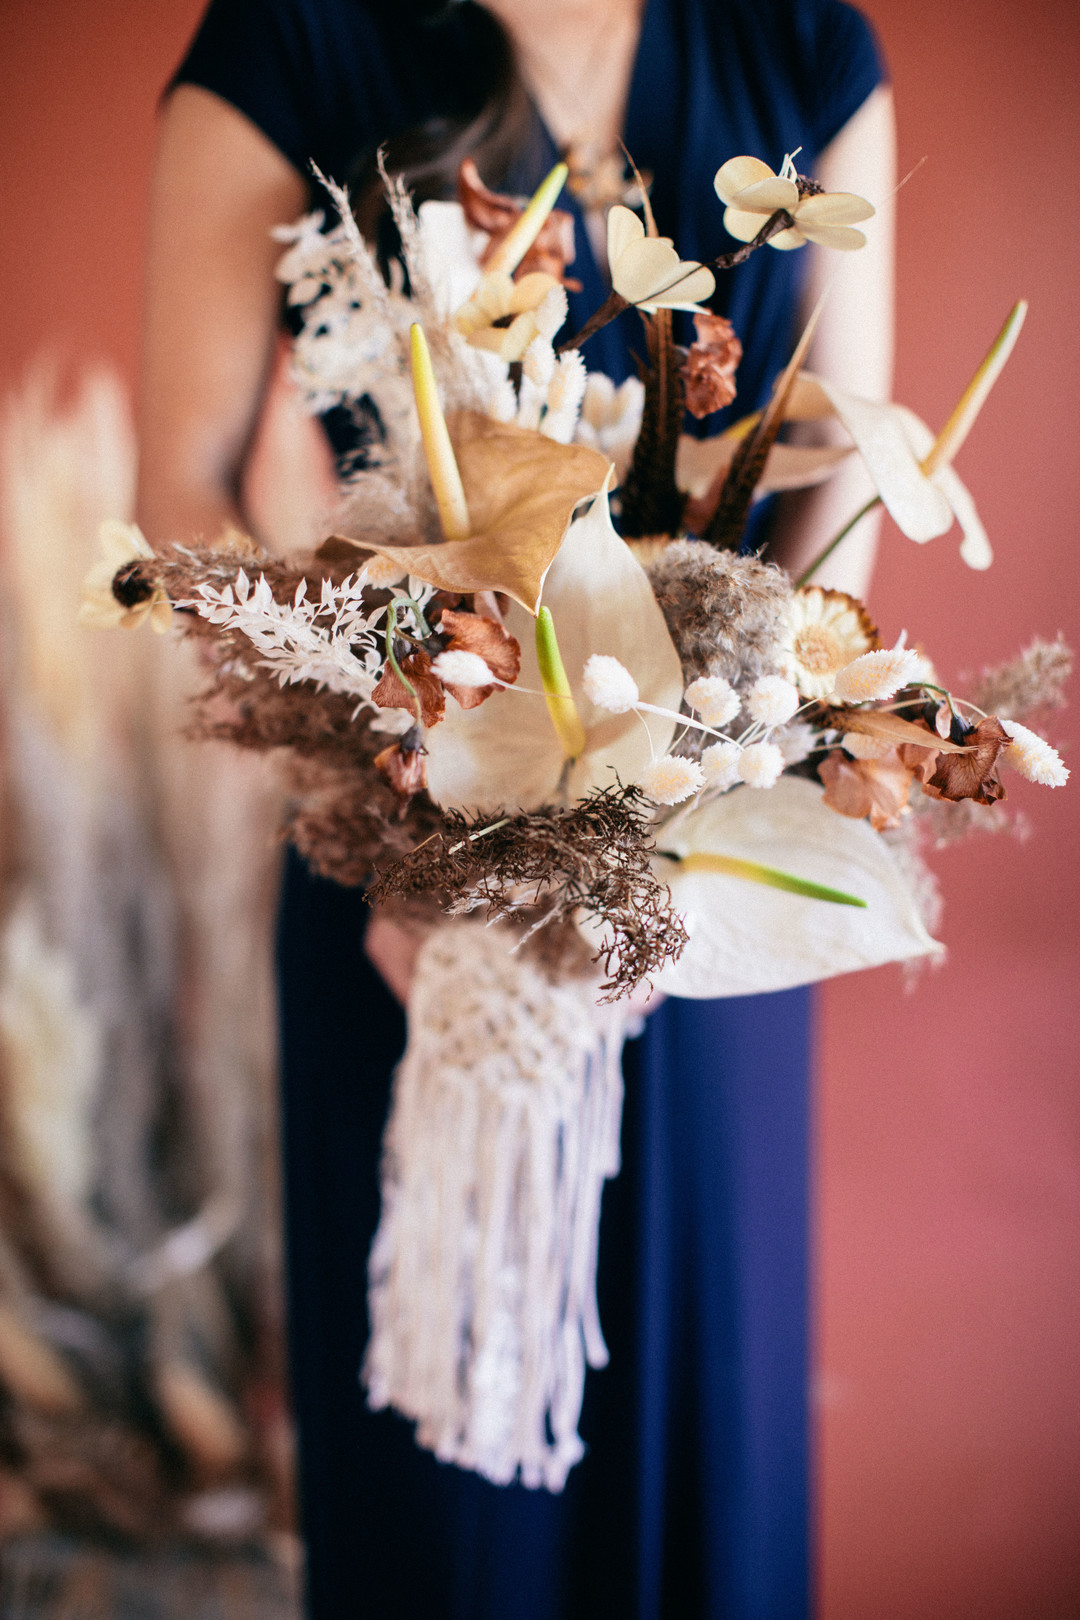 Another wedding bouquet was made of dried herbs and leaves, of fresh and dried blooms